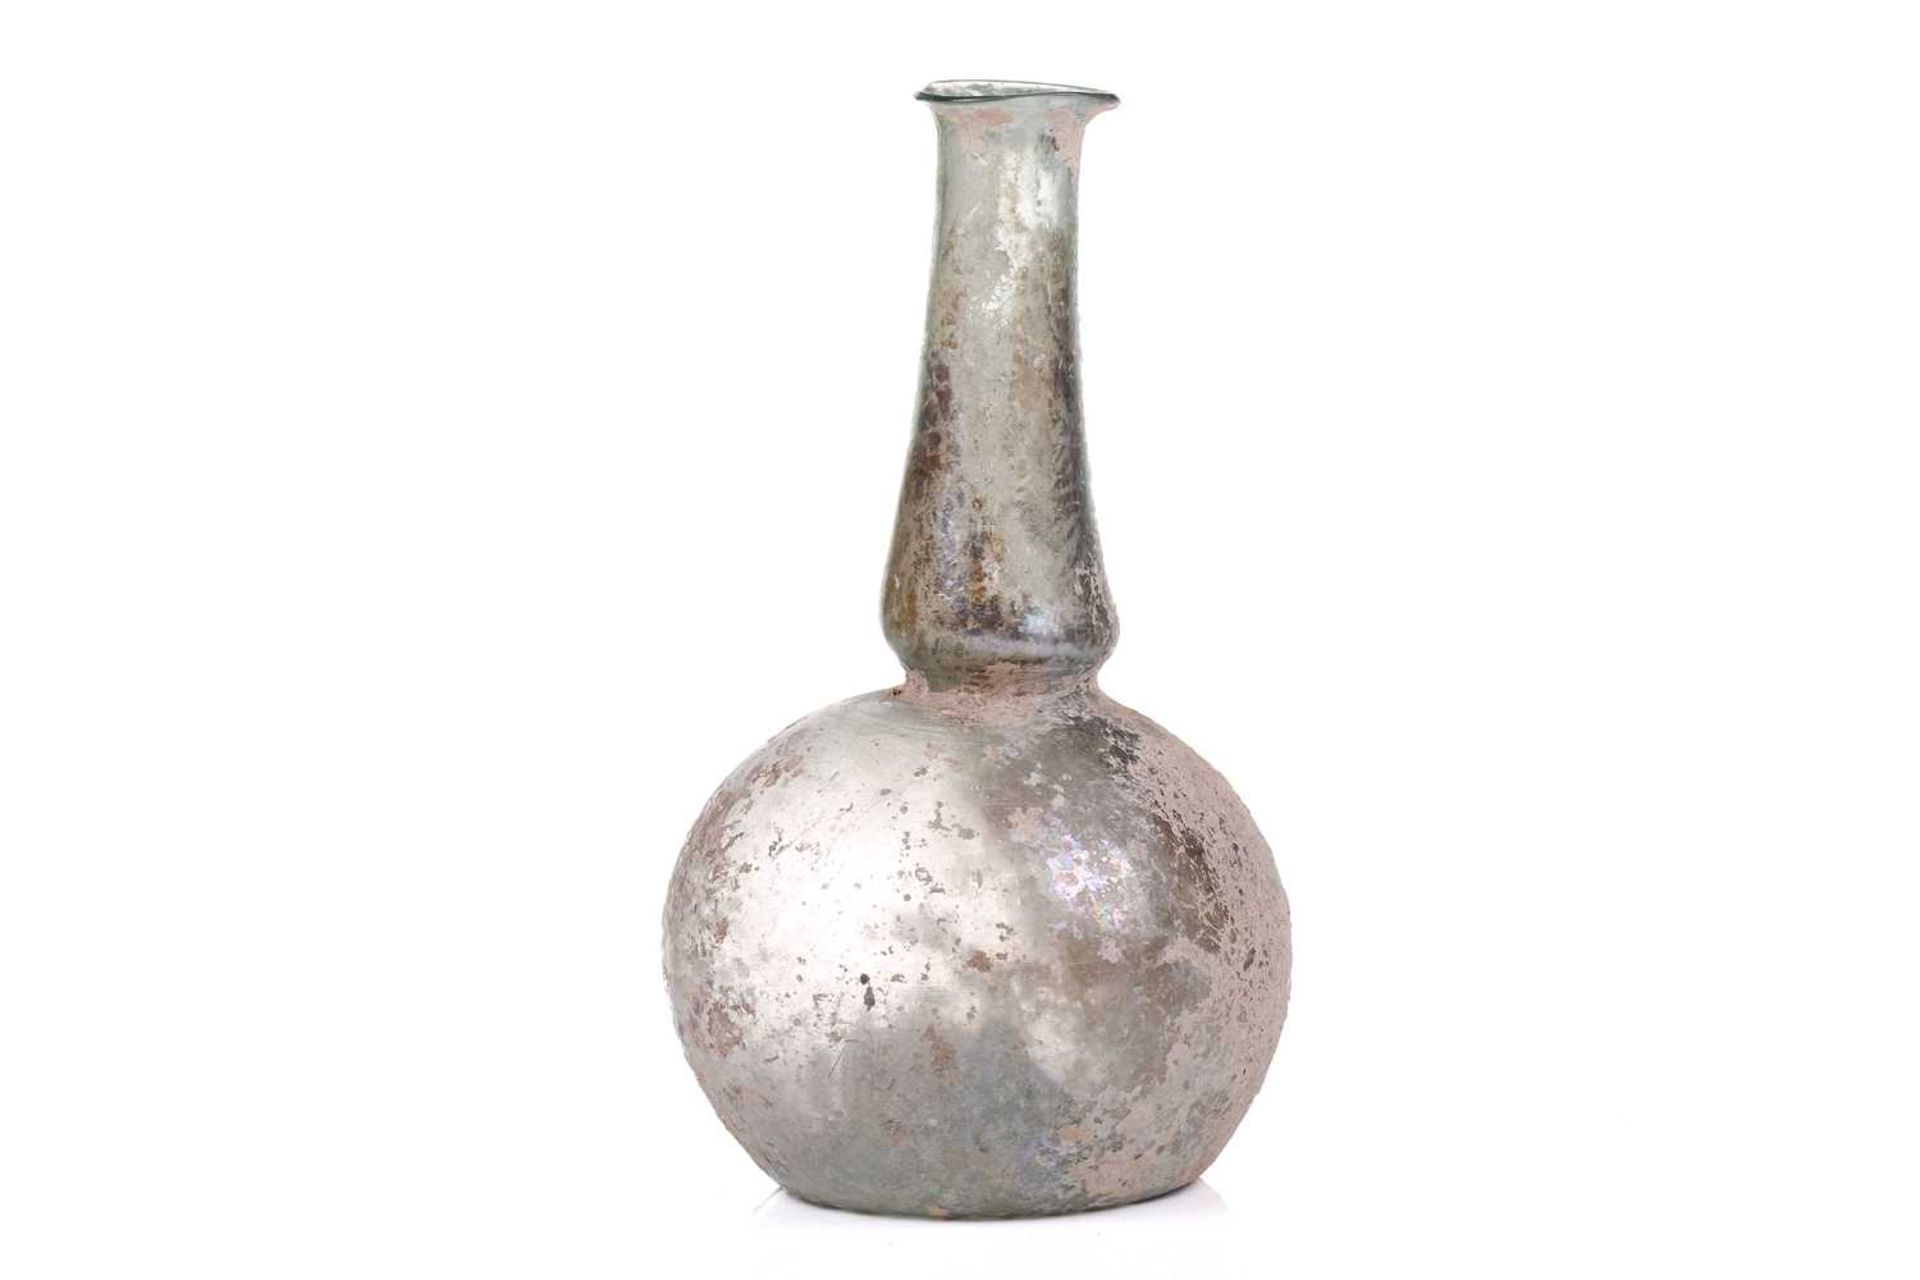 A Roman glass bulbous flask with everted rim, signs of oxidation and encrusted soil to the